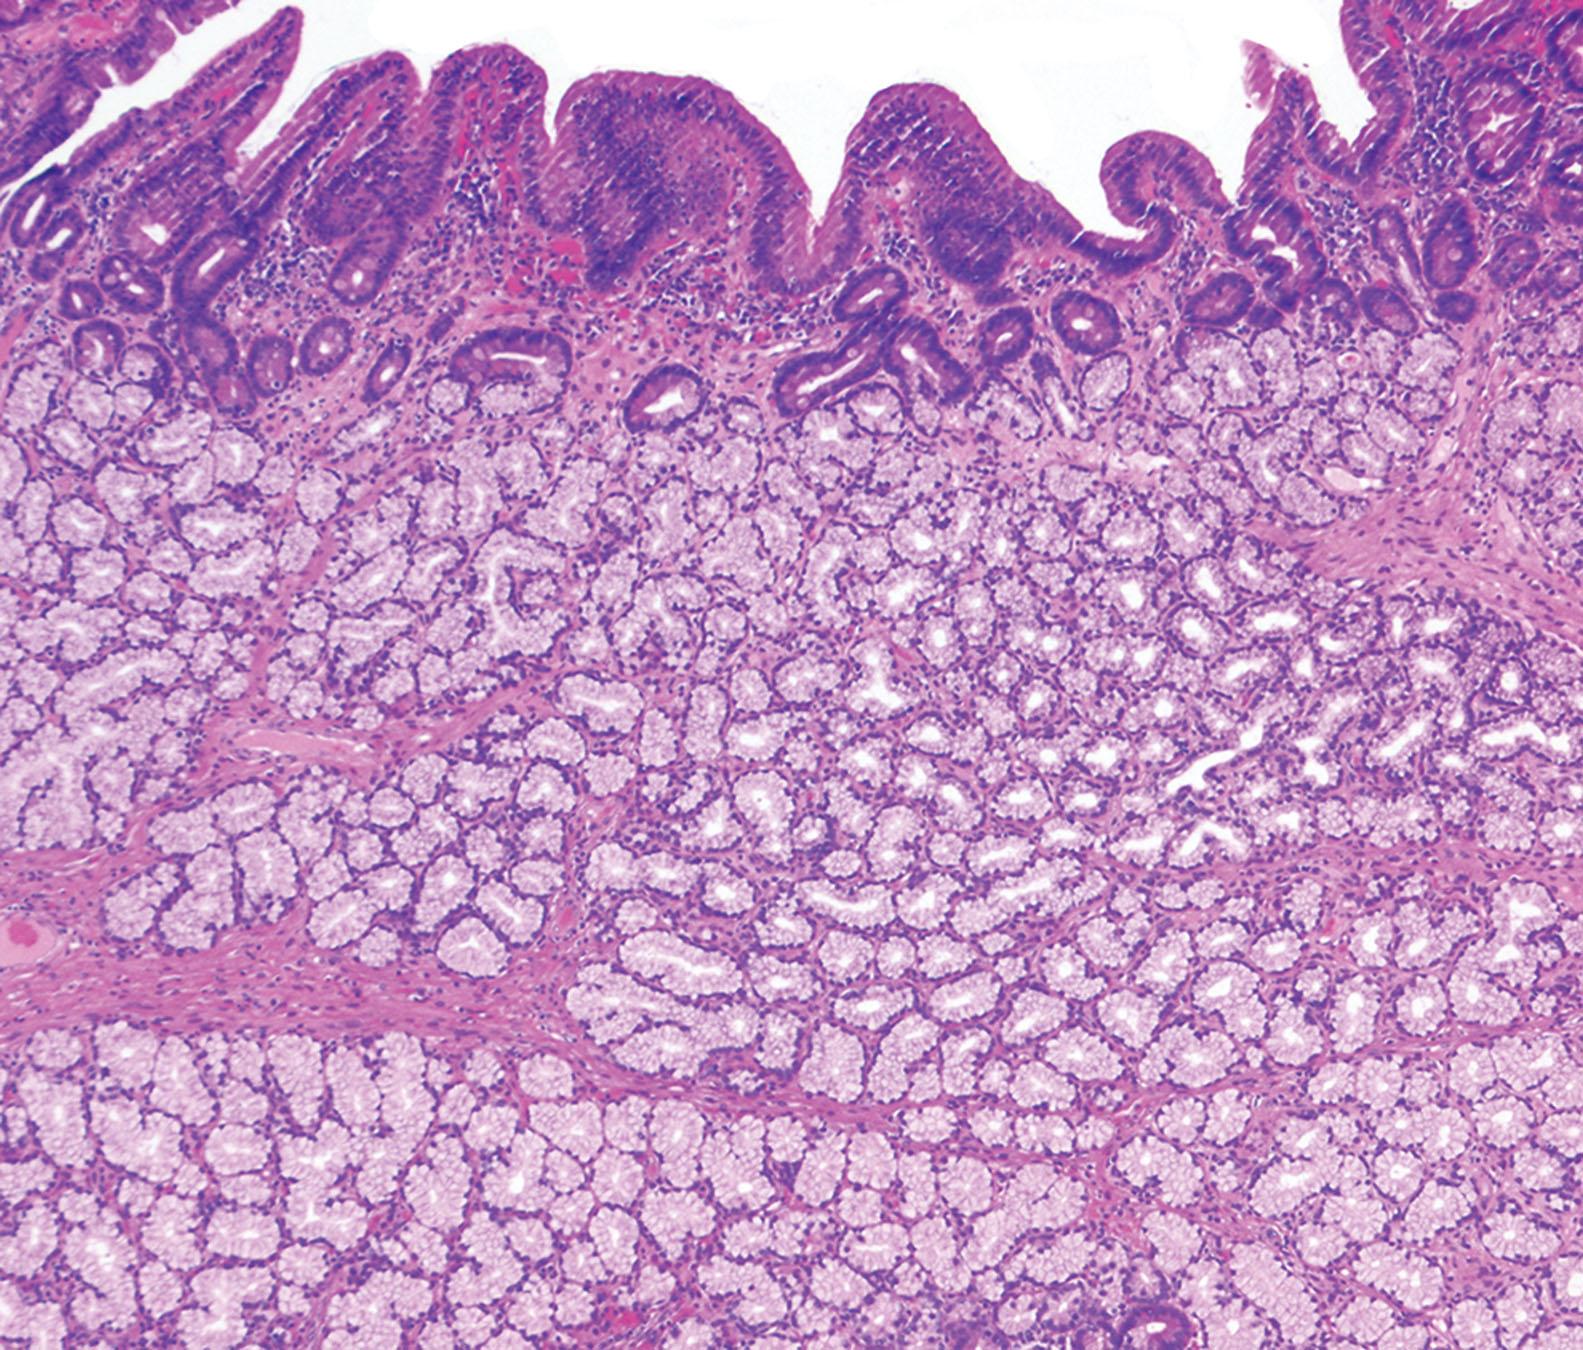 Figure 6.1, Brunner’s gland hyperplasia: The lesion is characterized by prominent lobules of Brunner’s glands within the submucosa and lamina propria.